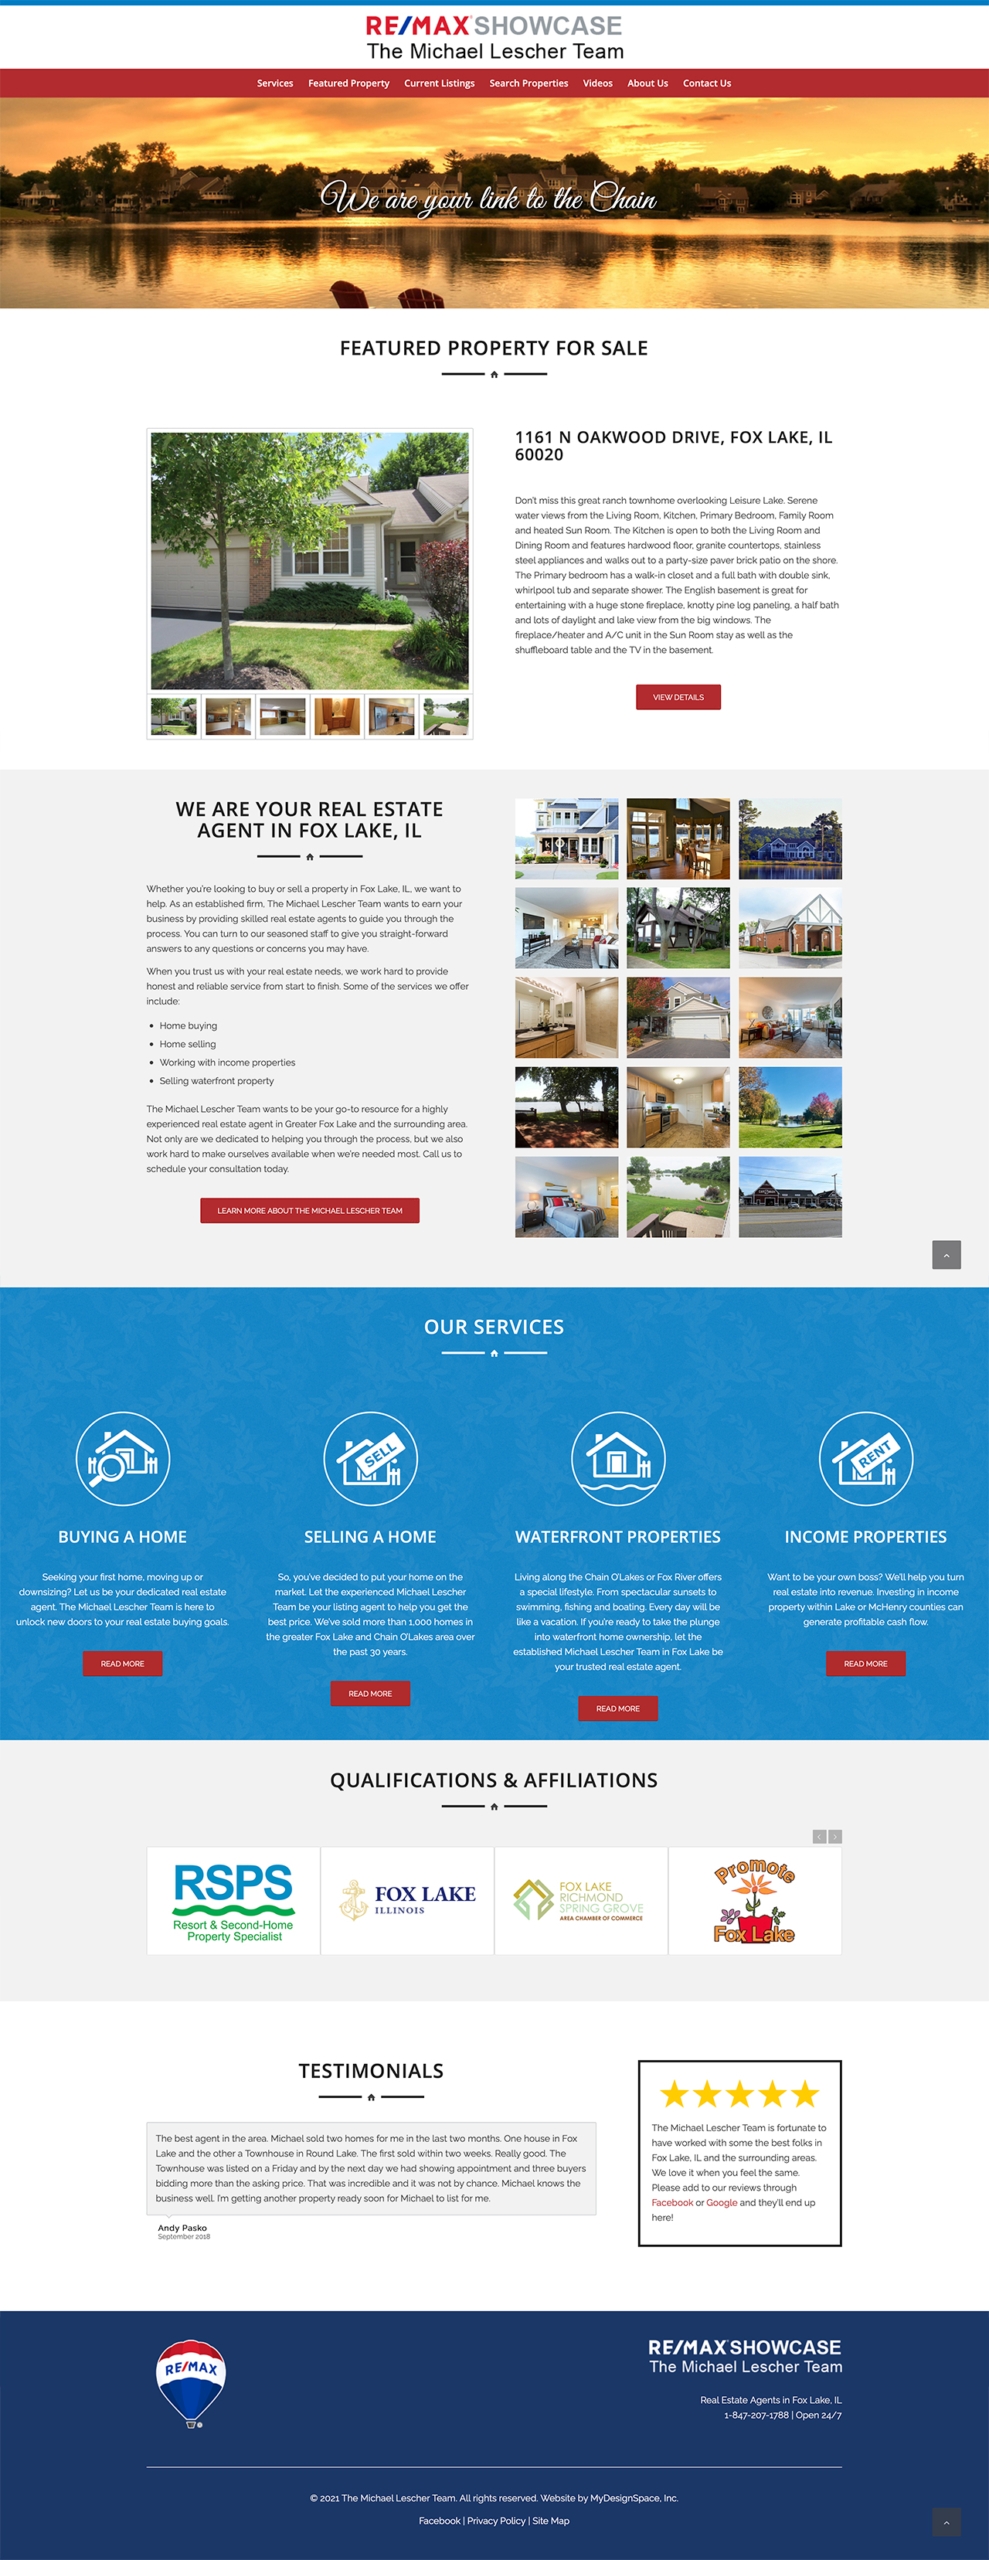 Remax Showcase - The Michael Lescher Team Home Page Layout